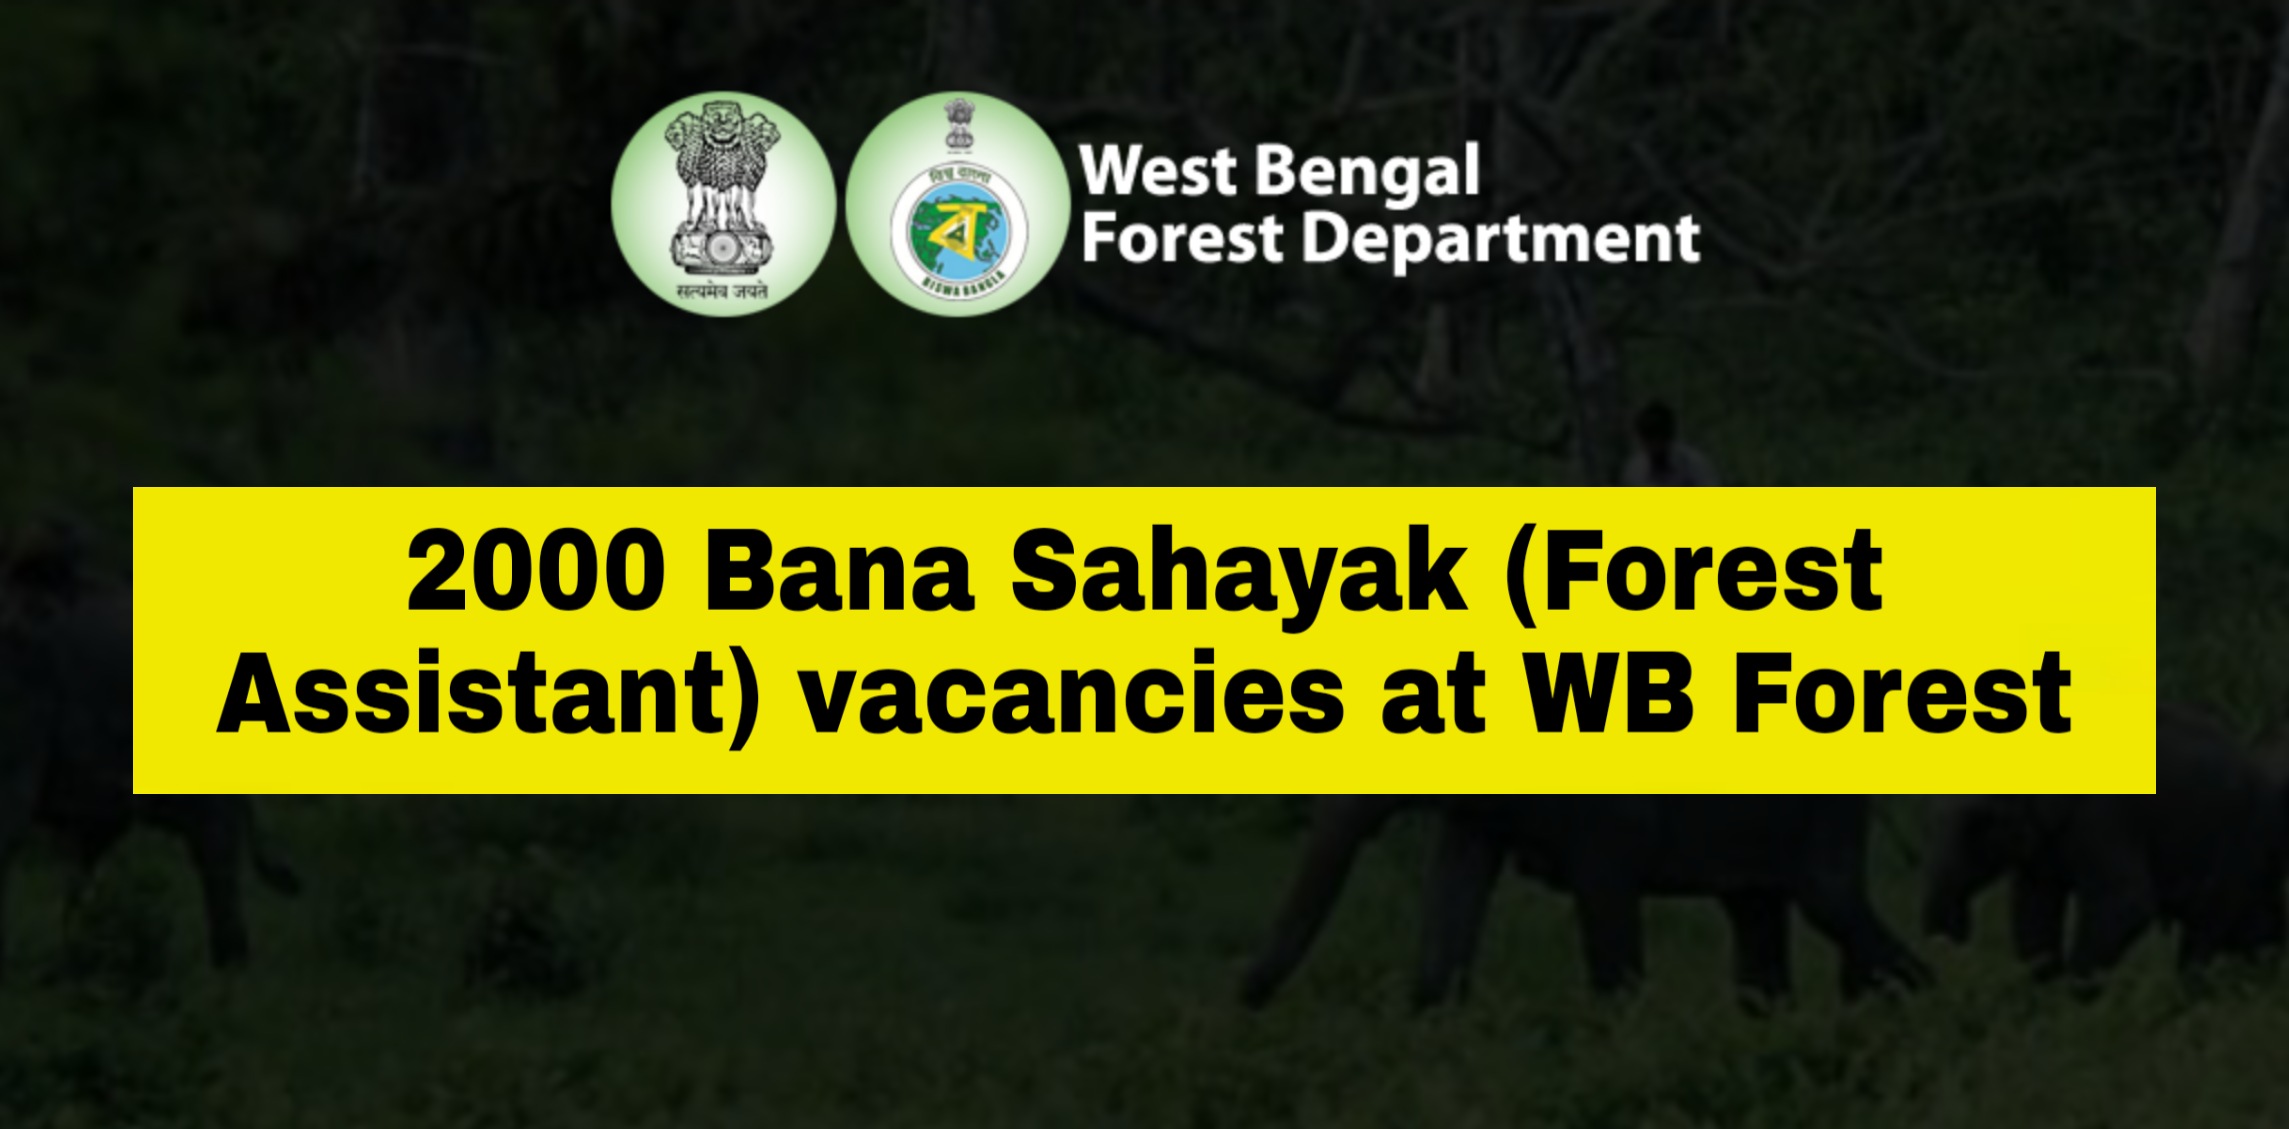 2000 Bana Sahayak (Forest Assistant) vacancies at WB Forest